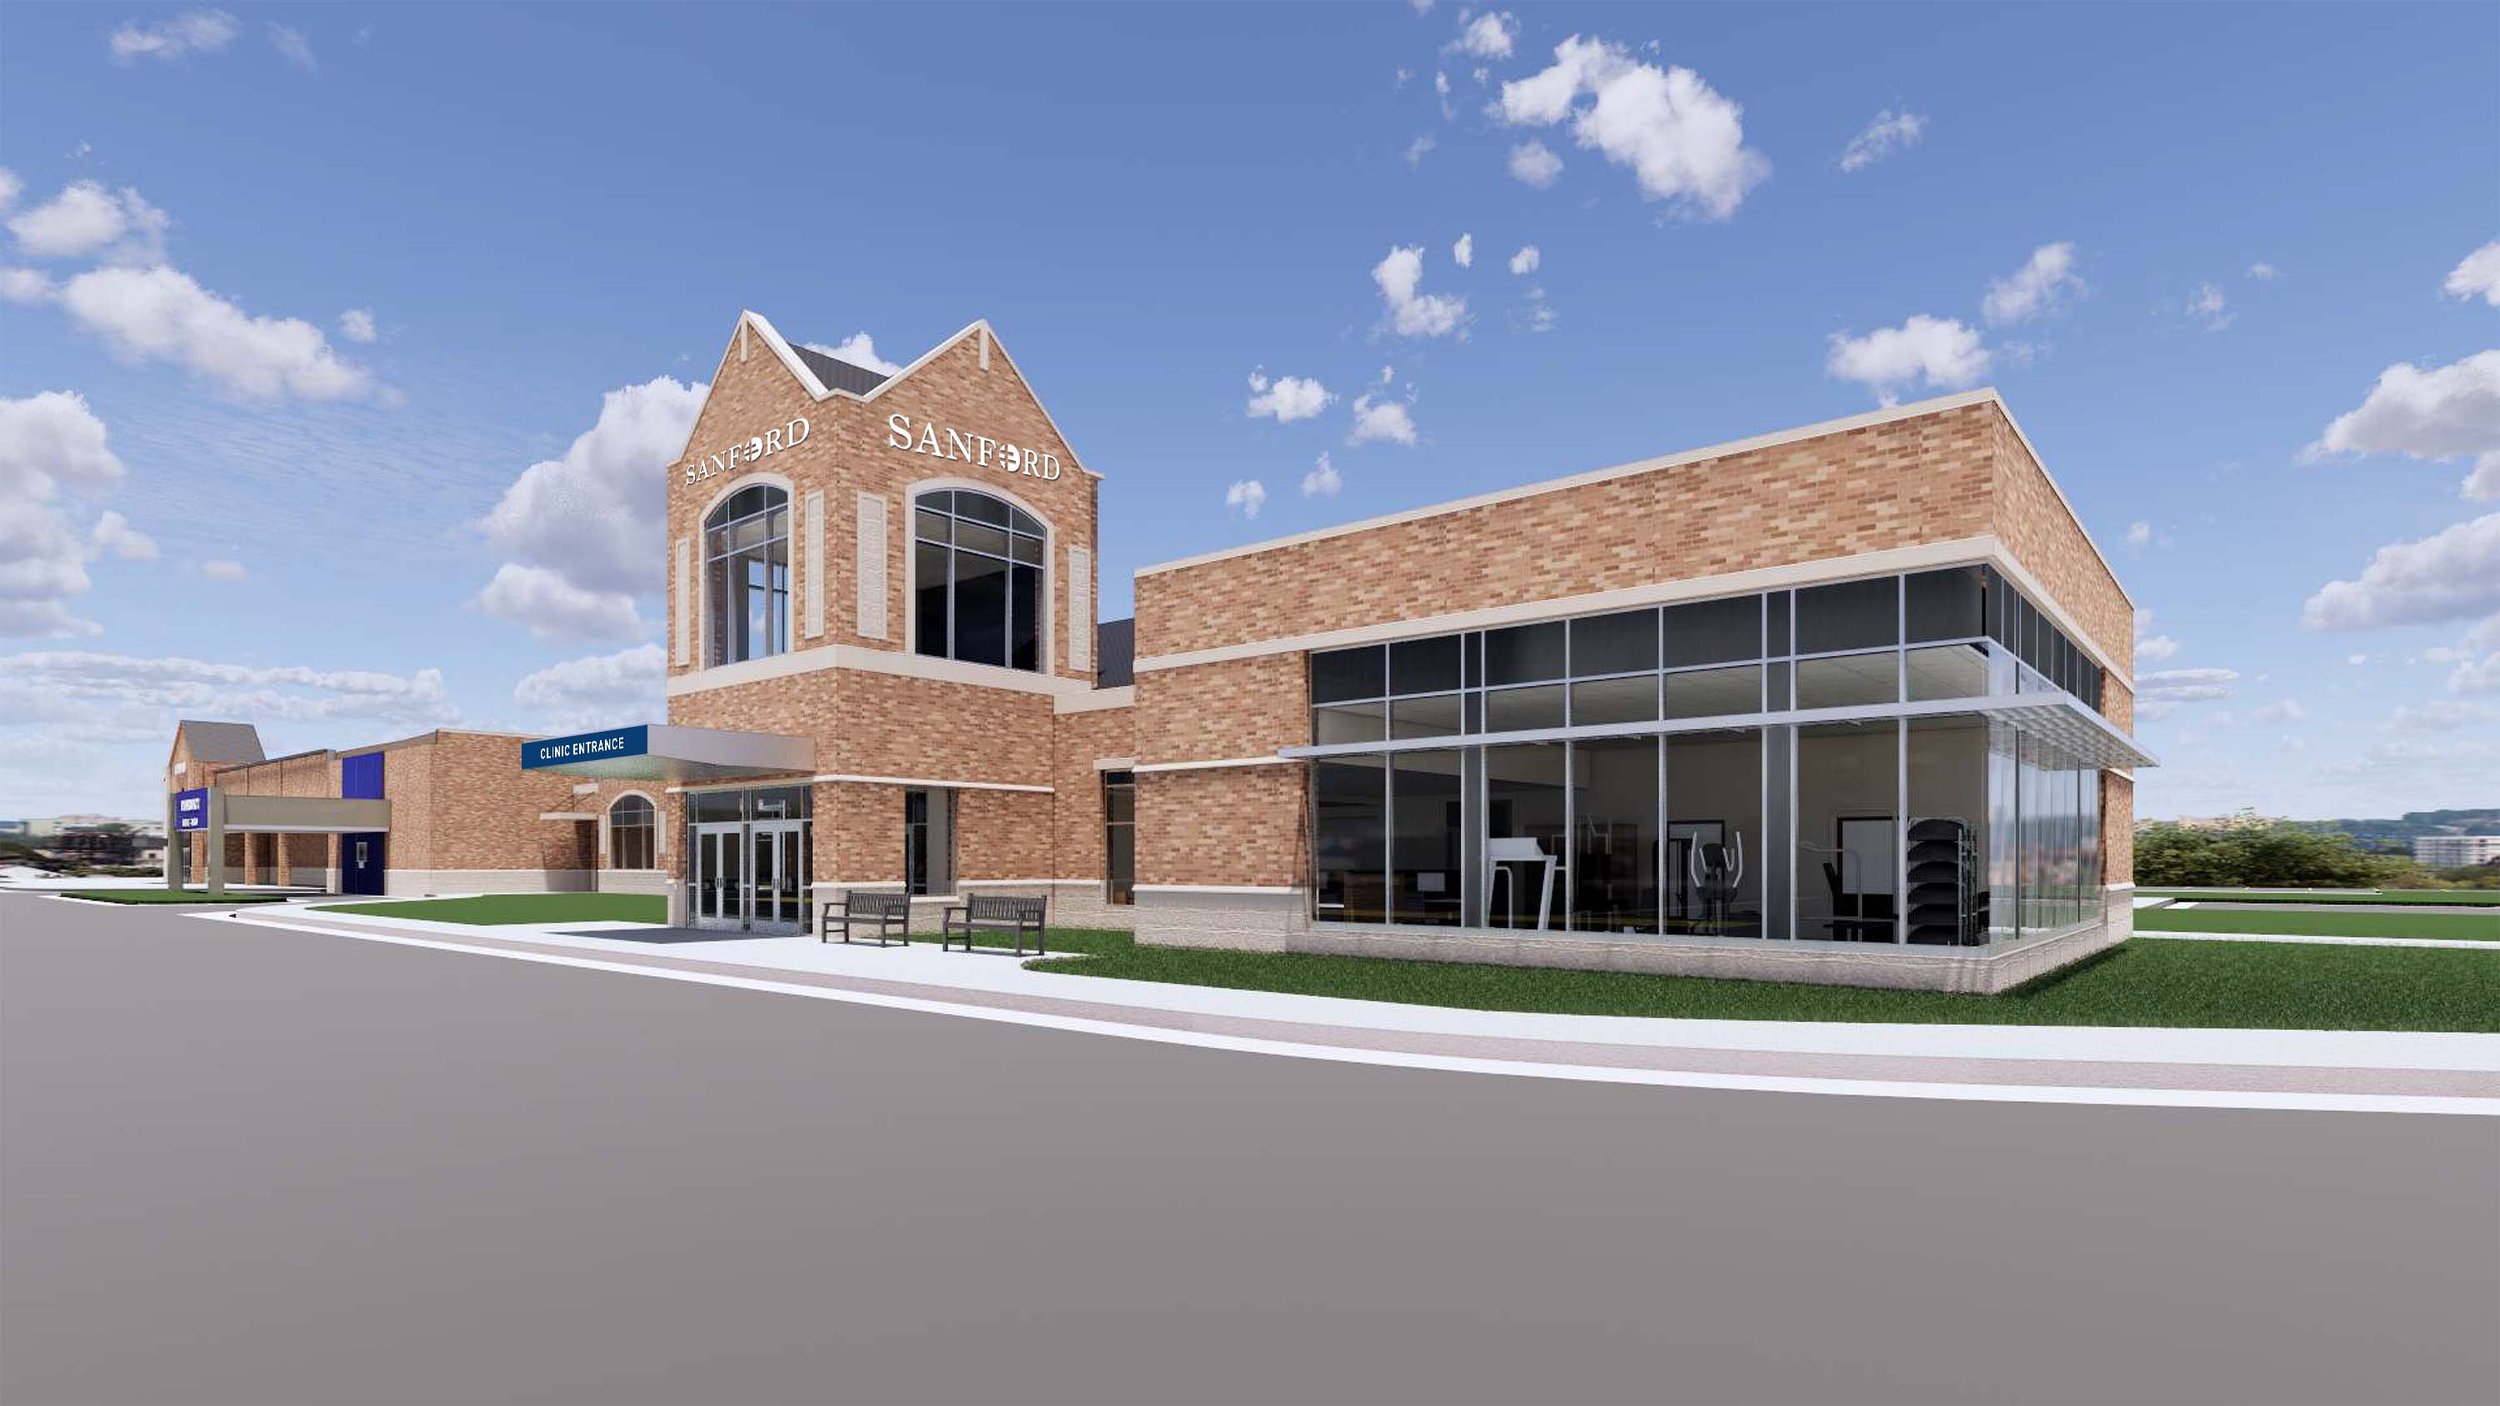 Sanford Health breaks ground on a 26,500 square foot primary care and PT clinic in Northeast Sioux Falls